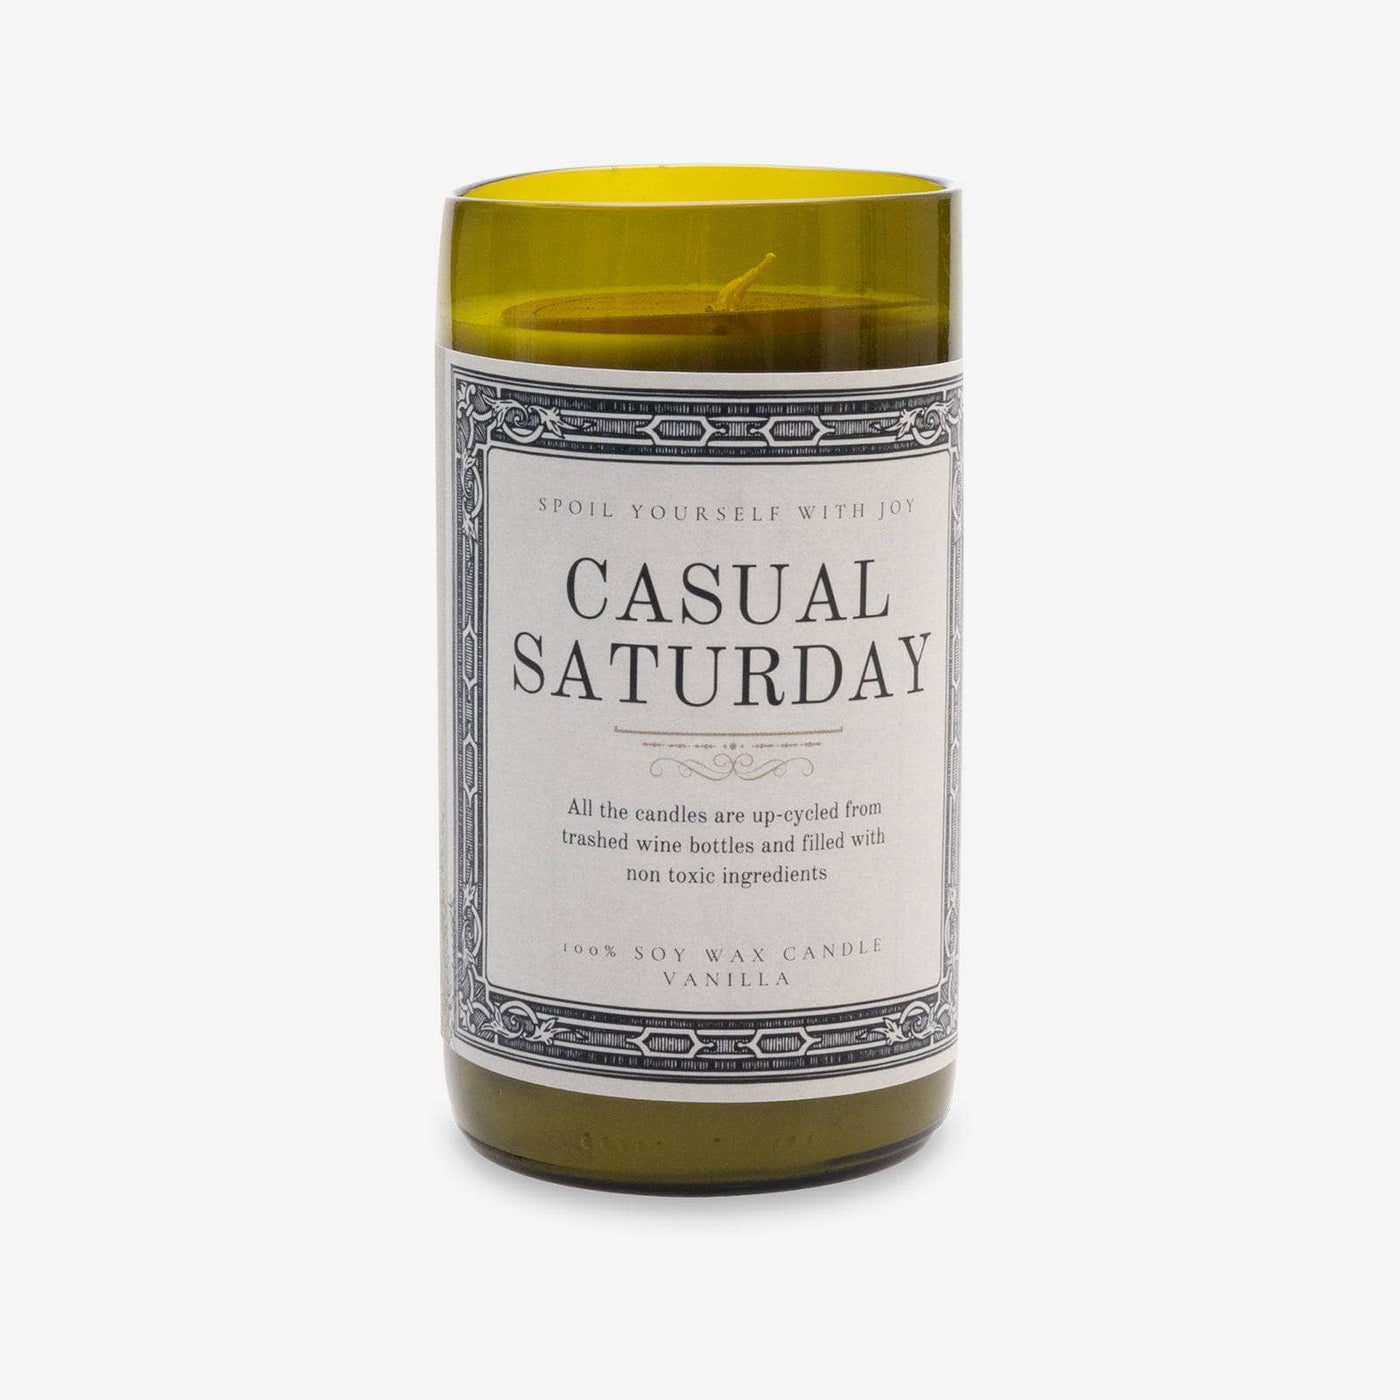 Casual Saturday Soy Wax Candle, Amber, 285 g Candles sazy.com